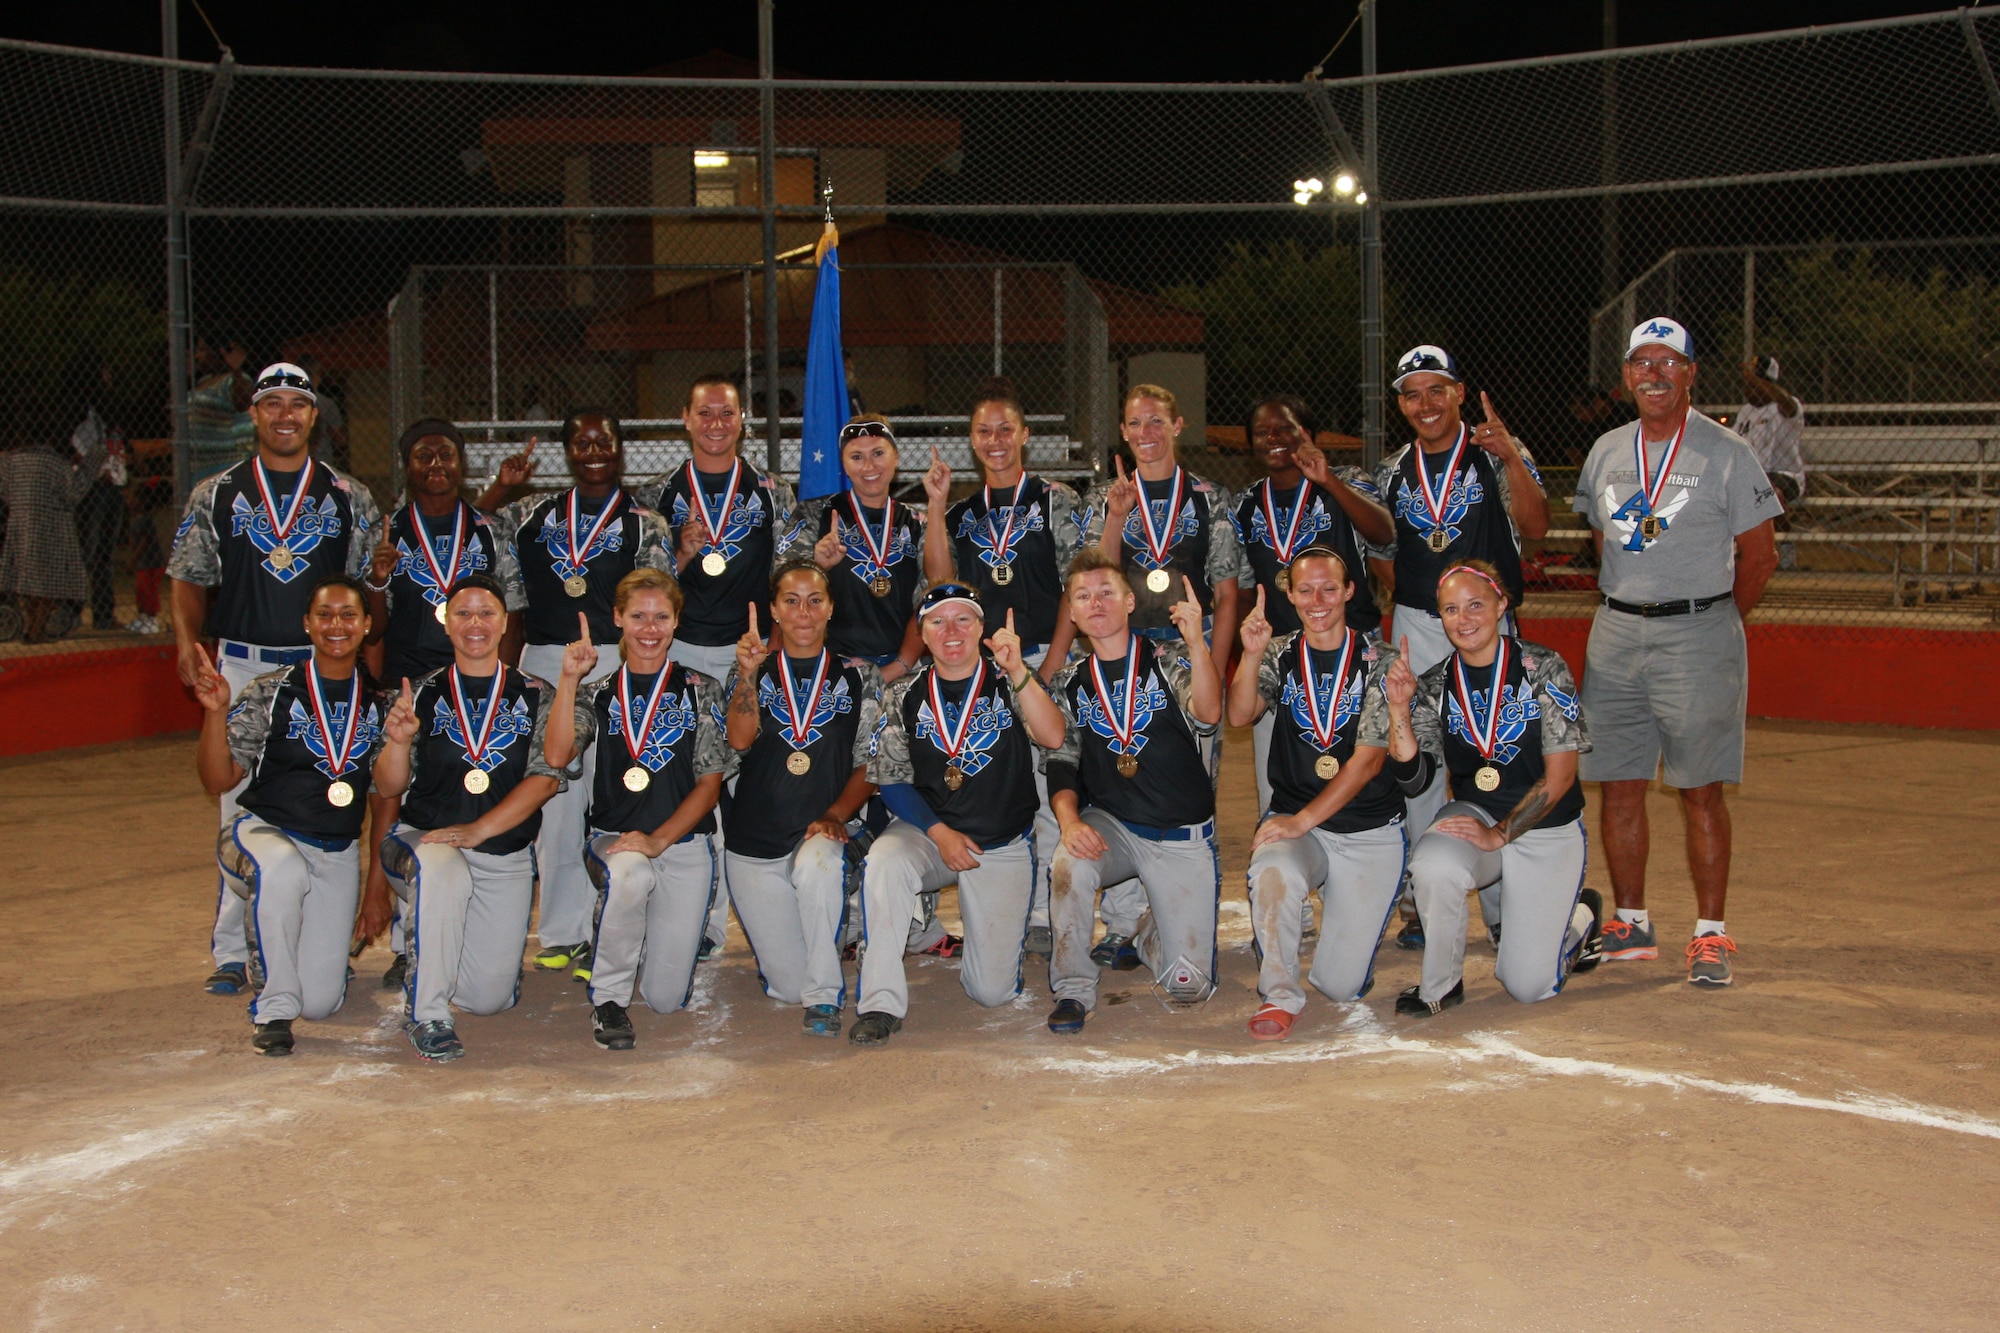 The 2014 All-Air Force Women's Softball team poses for a group photo after winning the gold medal during the 2014 Armed Forces Softball Championship at Fort Sill, Okla., Sept 19, 2014. (photo by Steve Brown)